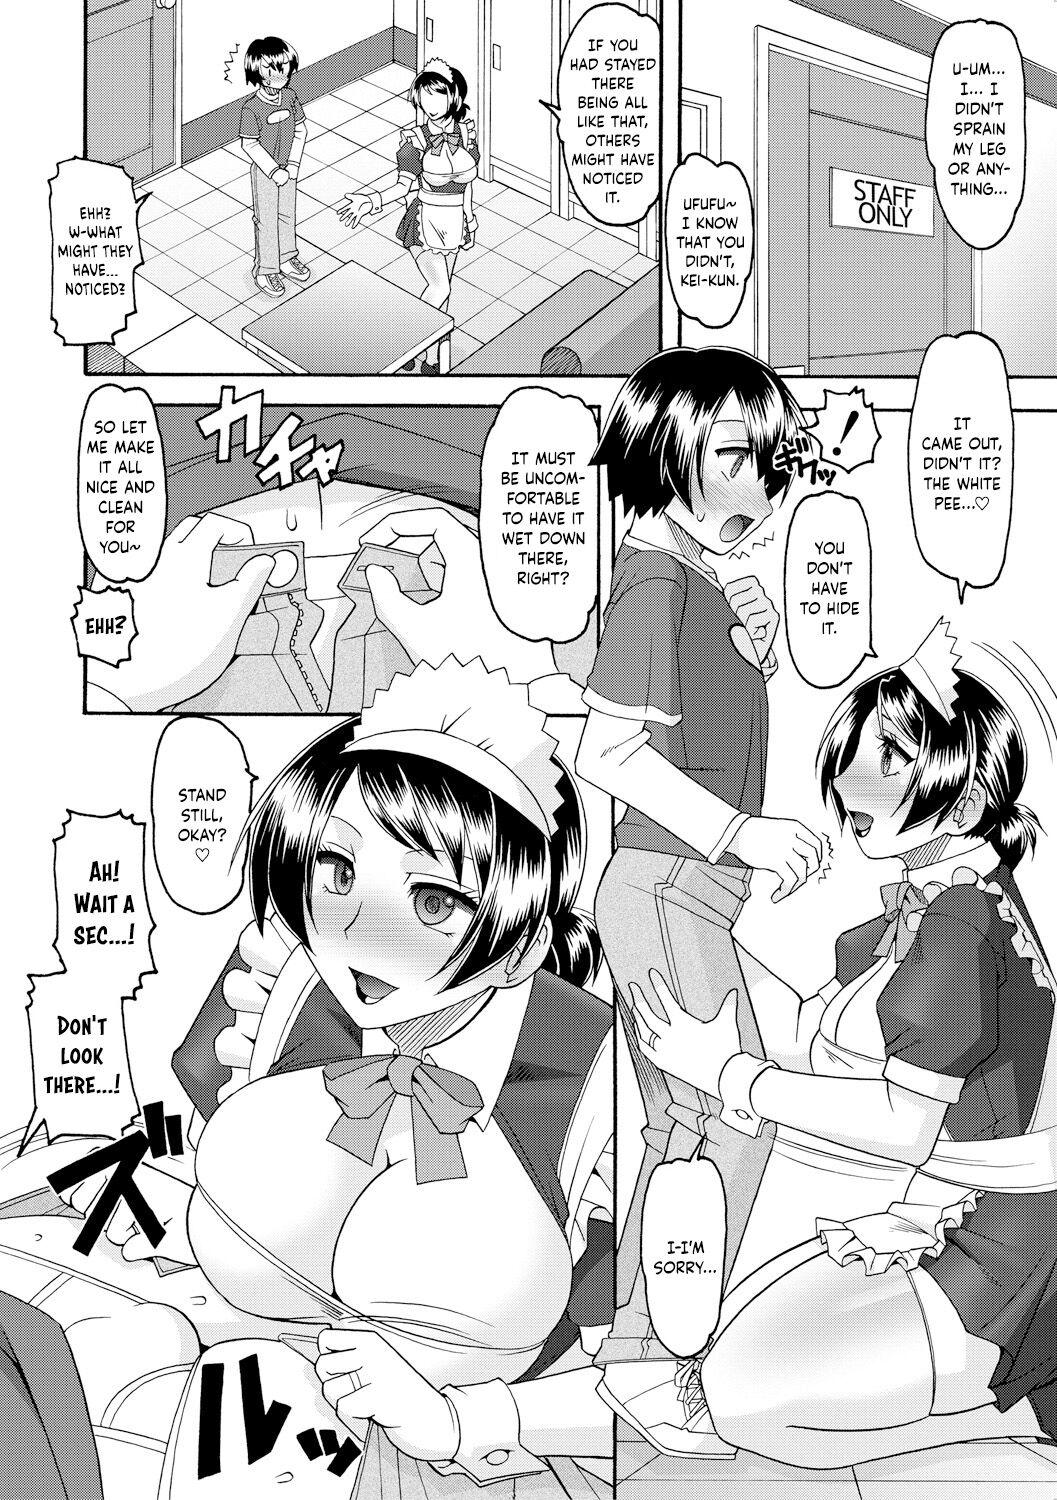 Maid OVER 30 Chapters 1-6 5